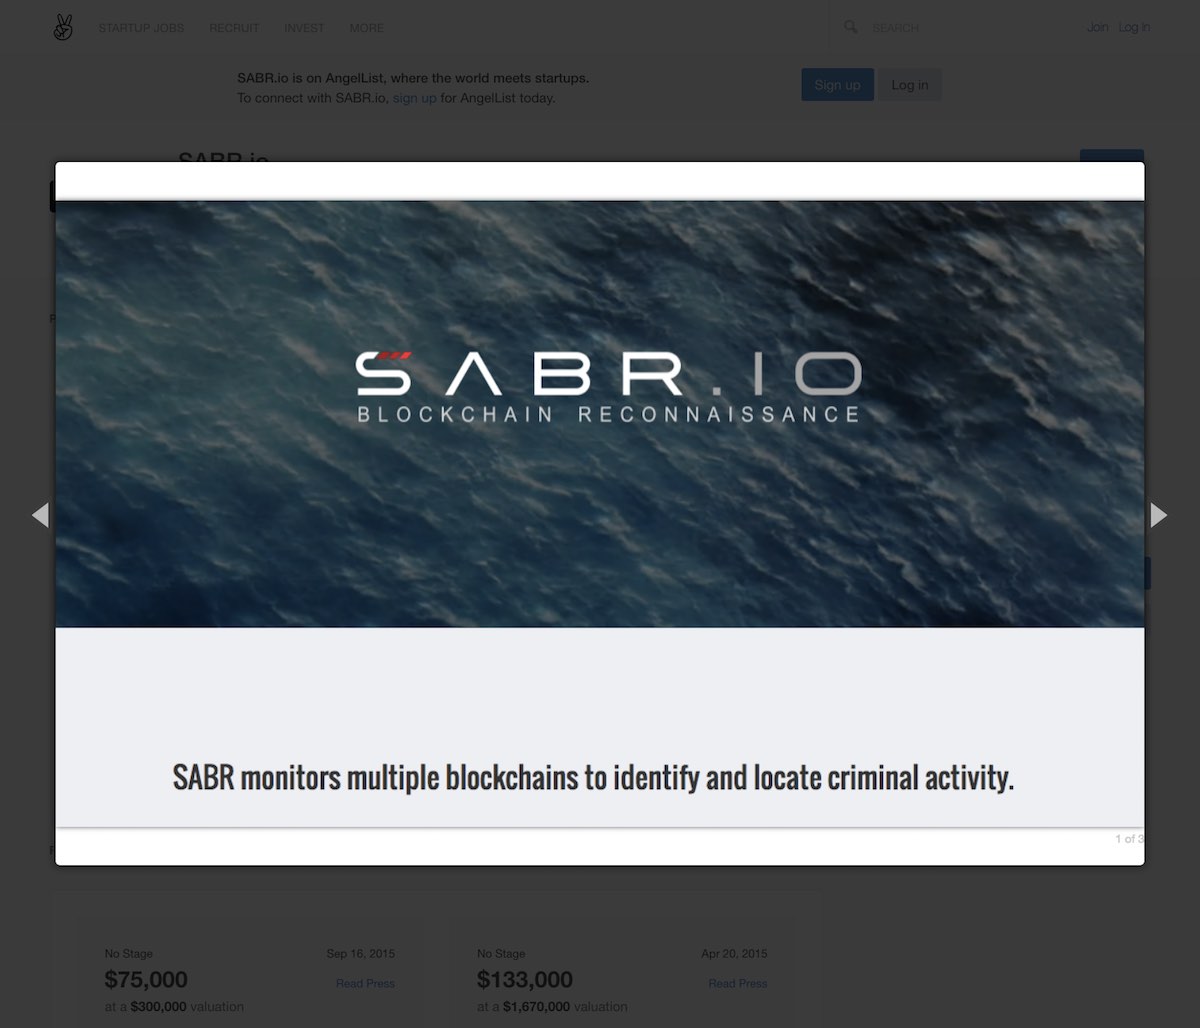 SABR.io is a software to monitor